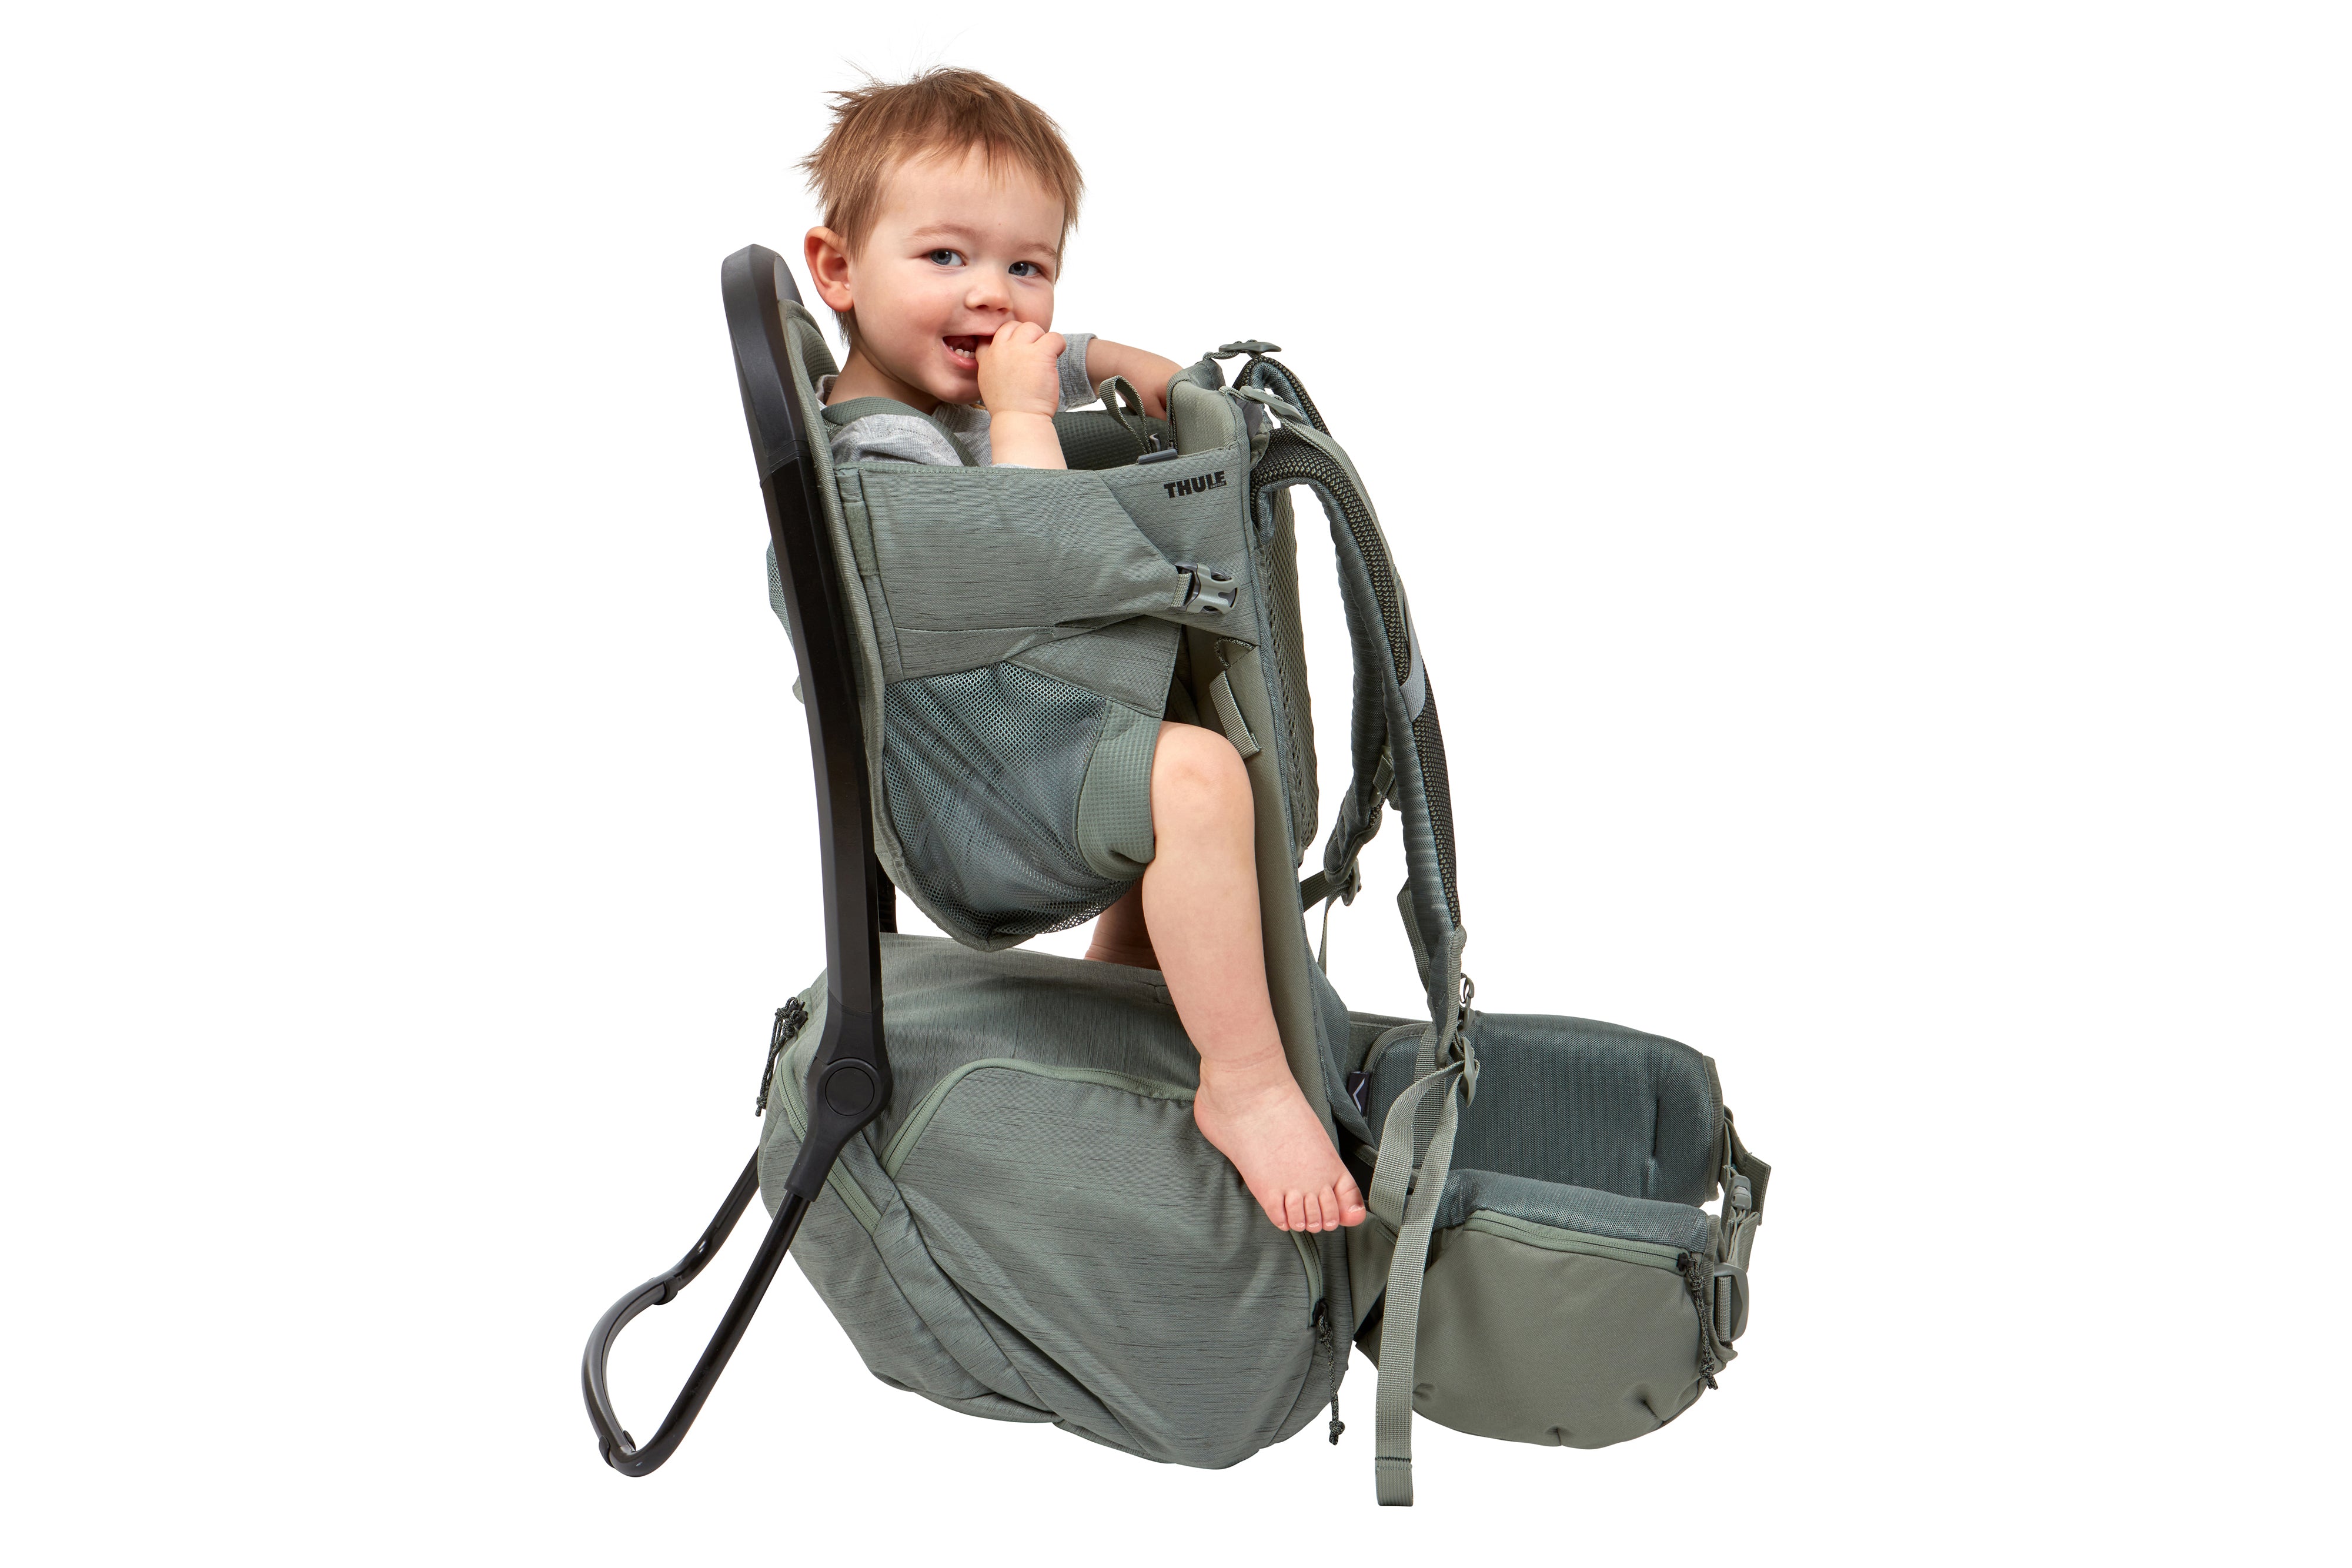 Toddler sitting in Thule Child Carrier Backpack Sapling Agave Green